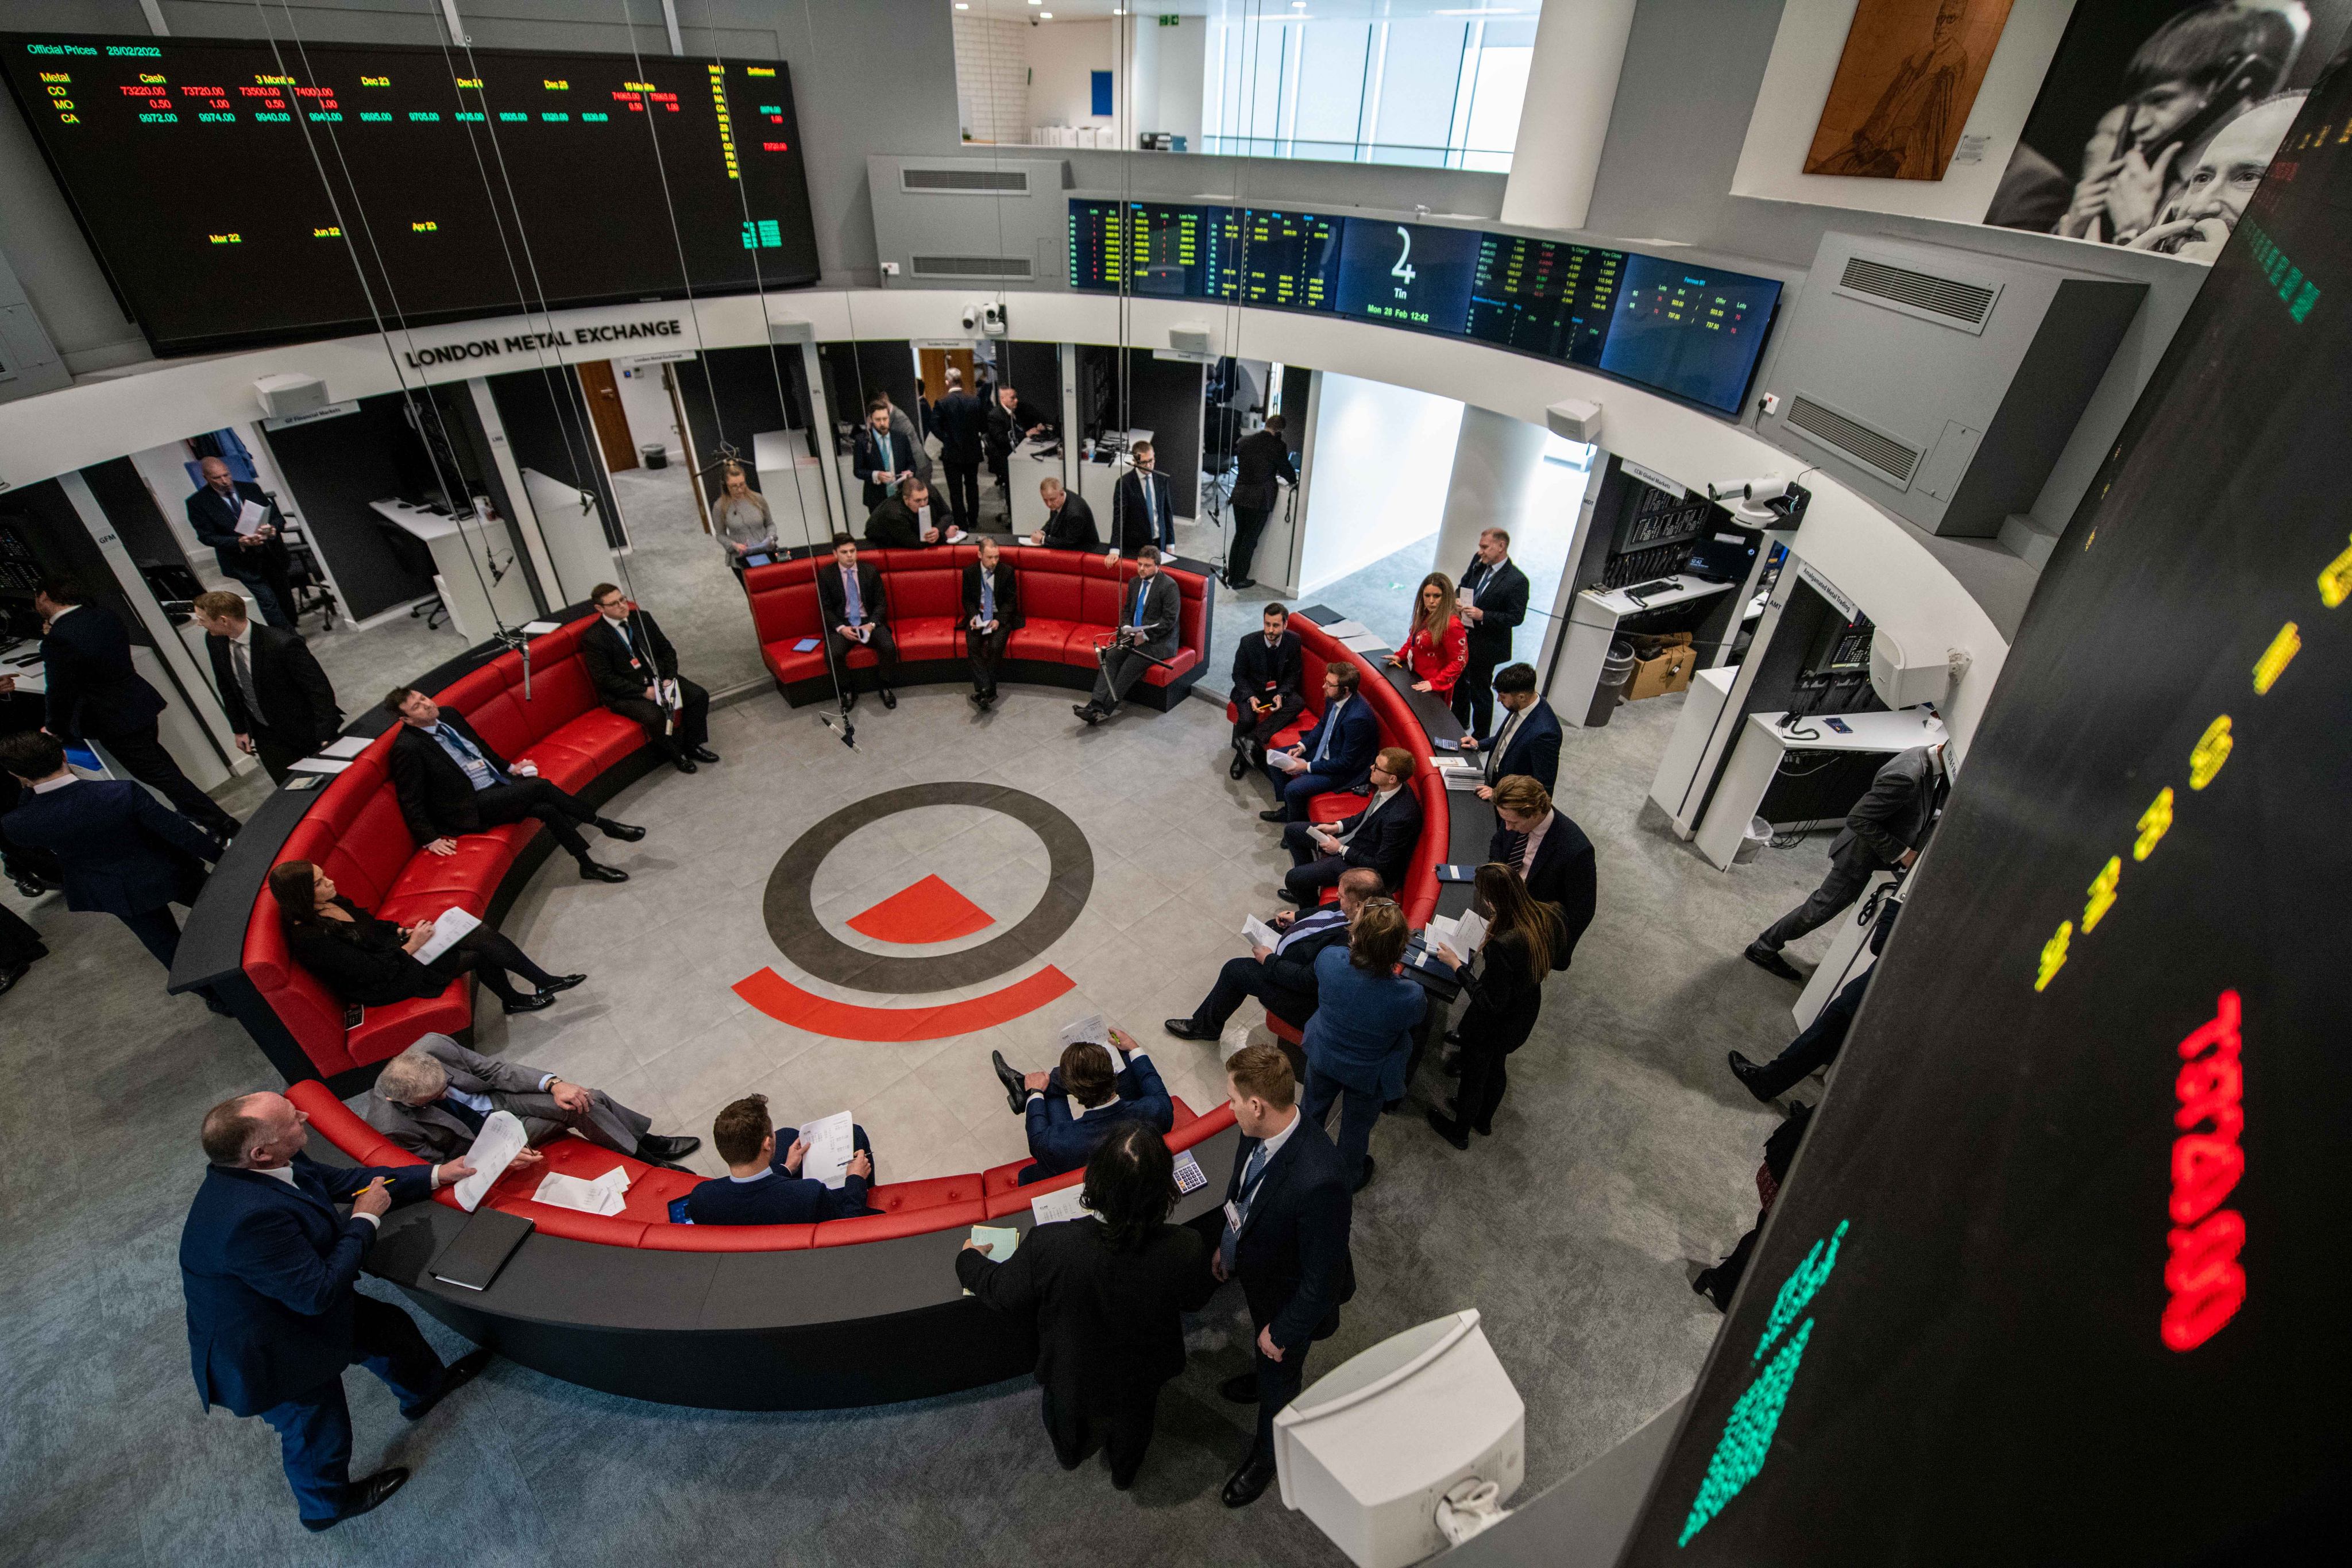 Traders, brokers and clerks on the trading floor of the open outcry pit at the London Metal Exchange Ltd. (LME) in London on Monday, February 28, 2022. Photo: Bloomberg